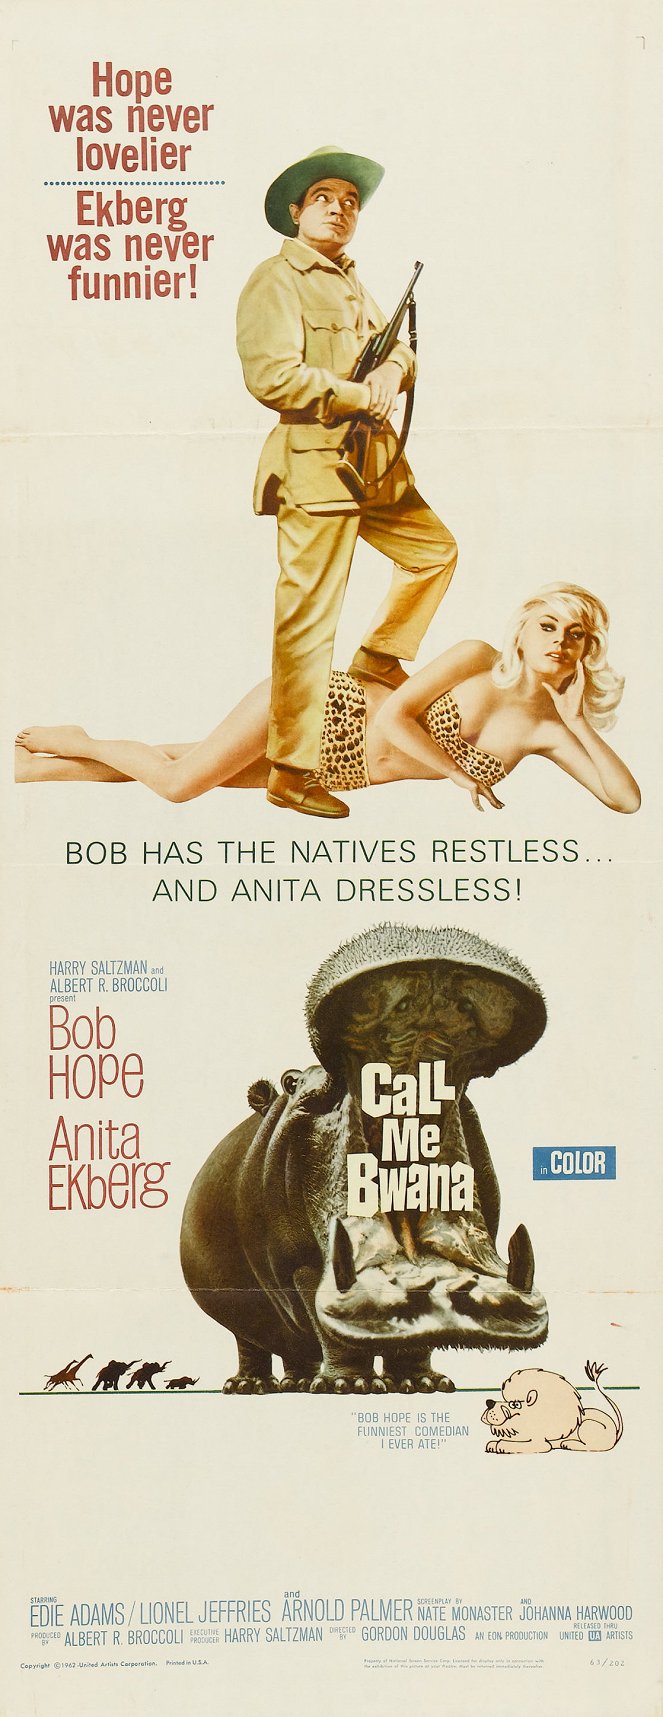 Call Me Bwana - Posters